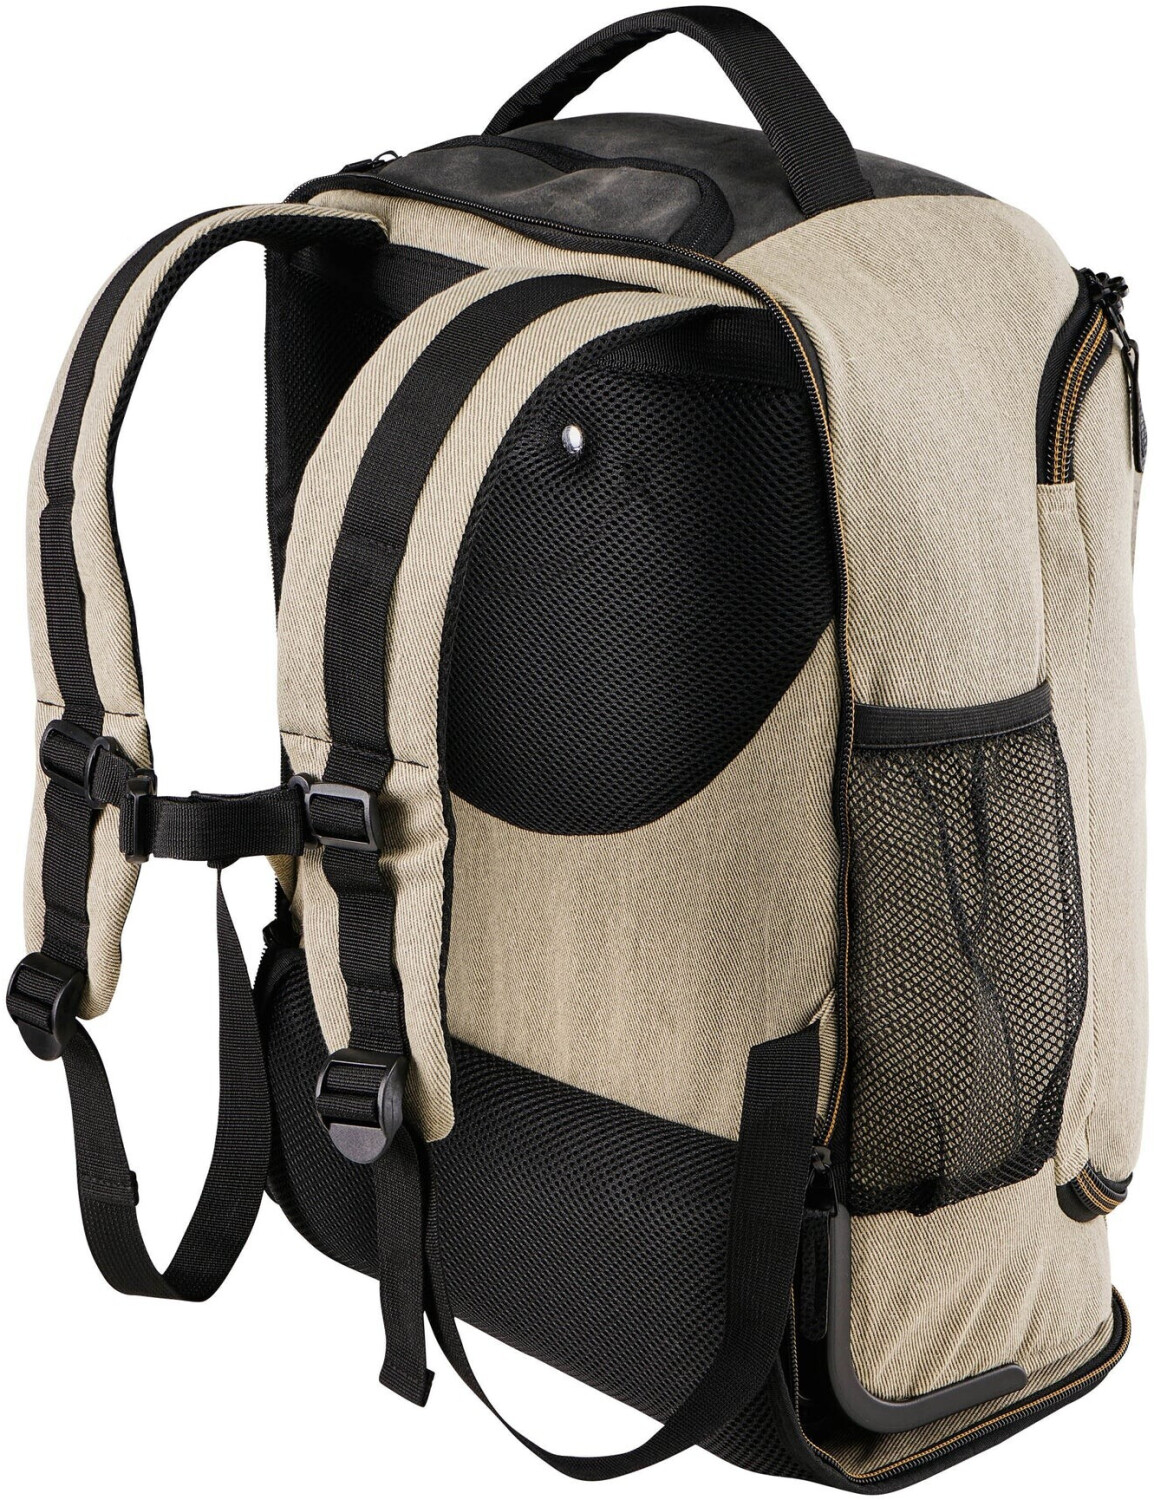 Buy Cabin Max Manhattan Hybrid Trolley Backpack 30L grey from £59.95  (Today) – Best Deals on